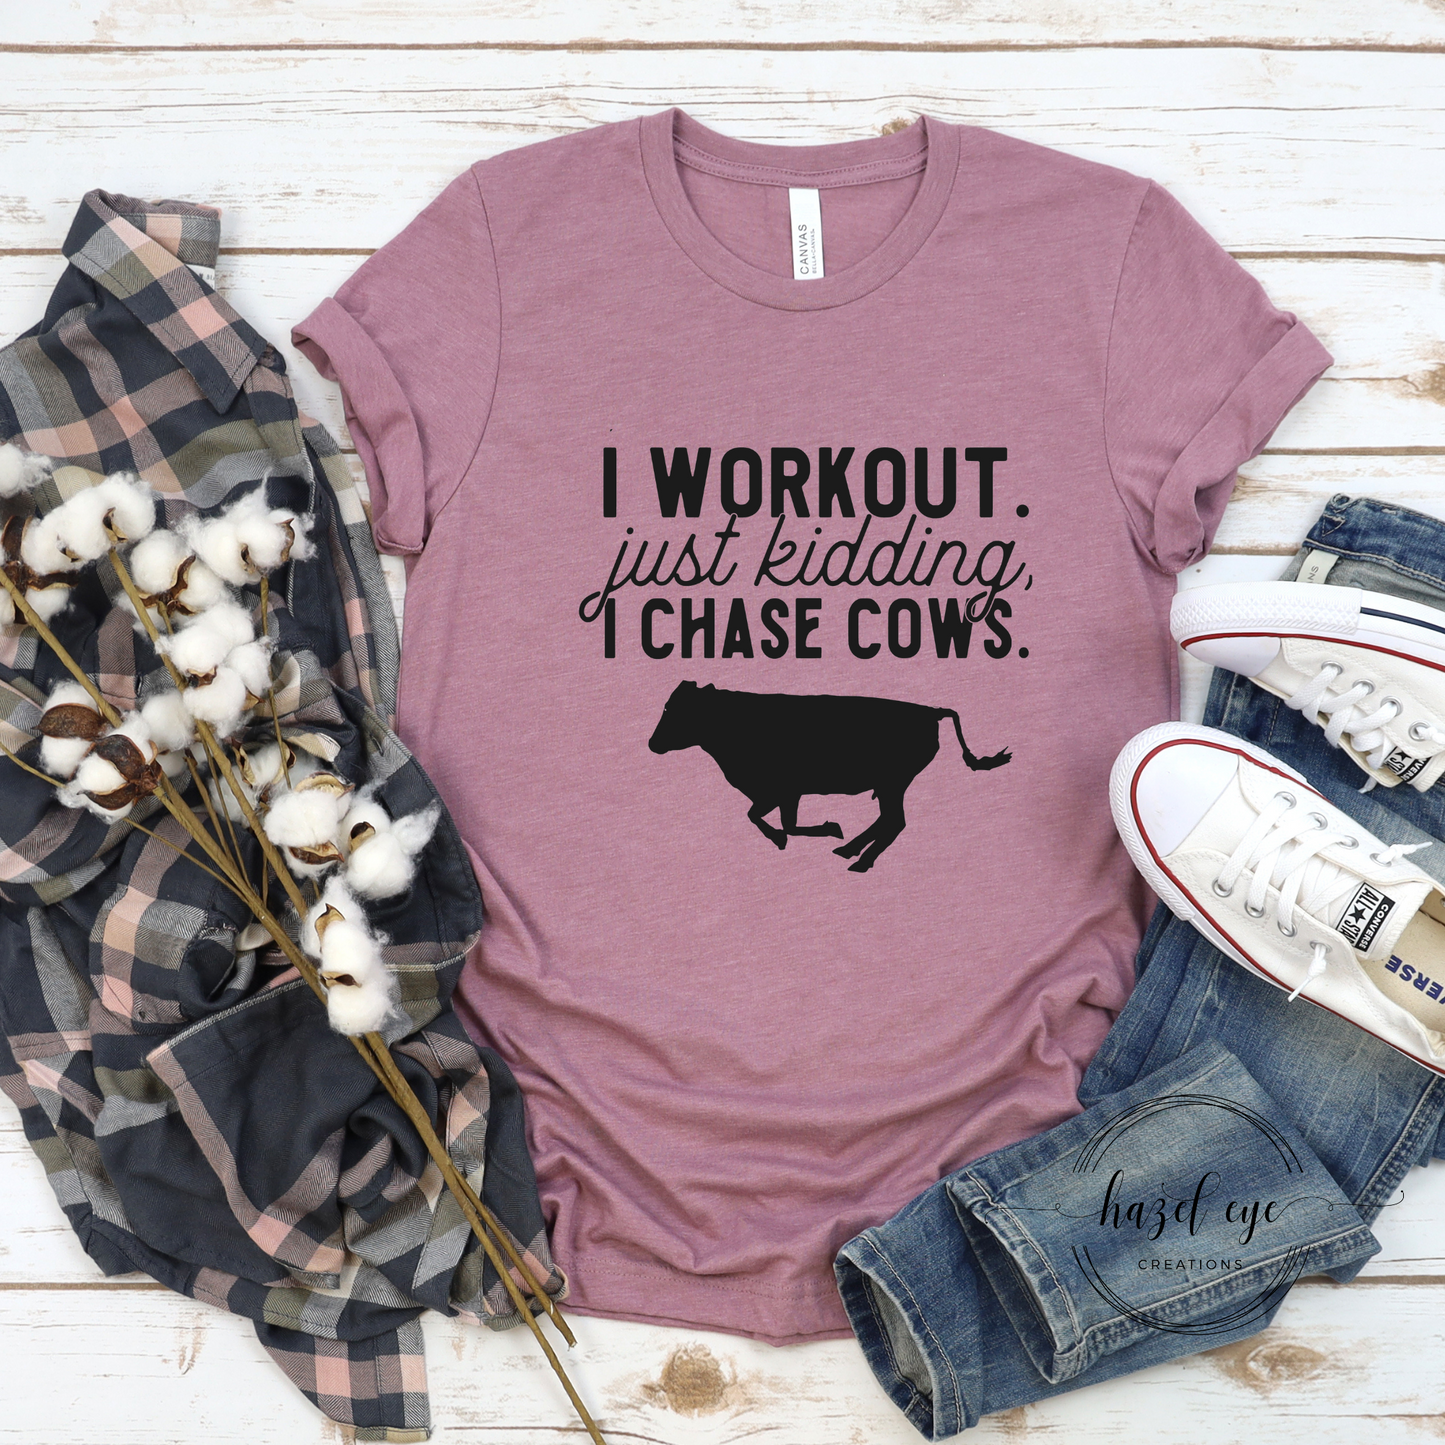 I workout just kidding I chase cows